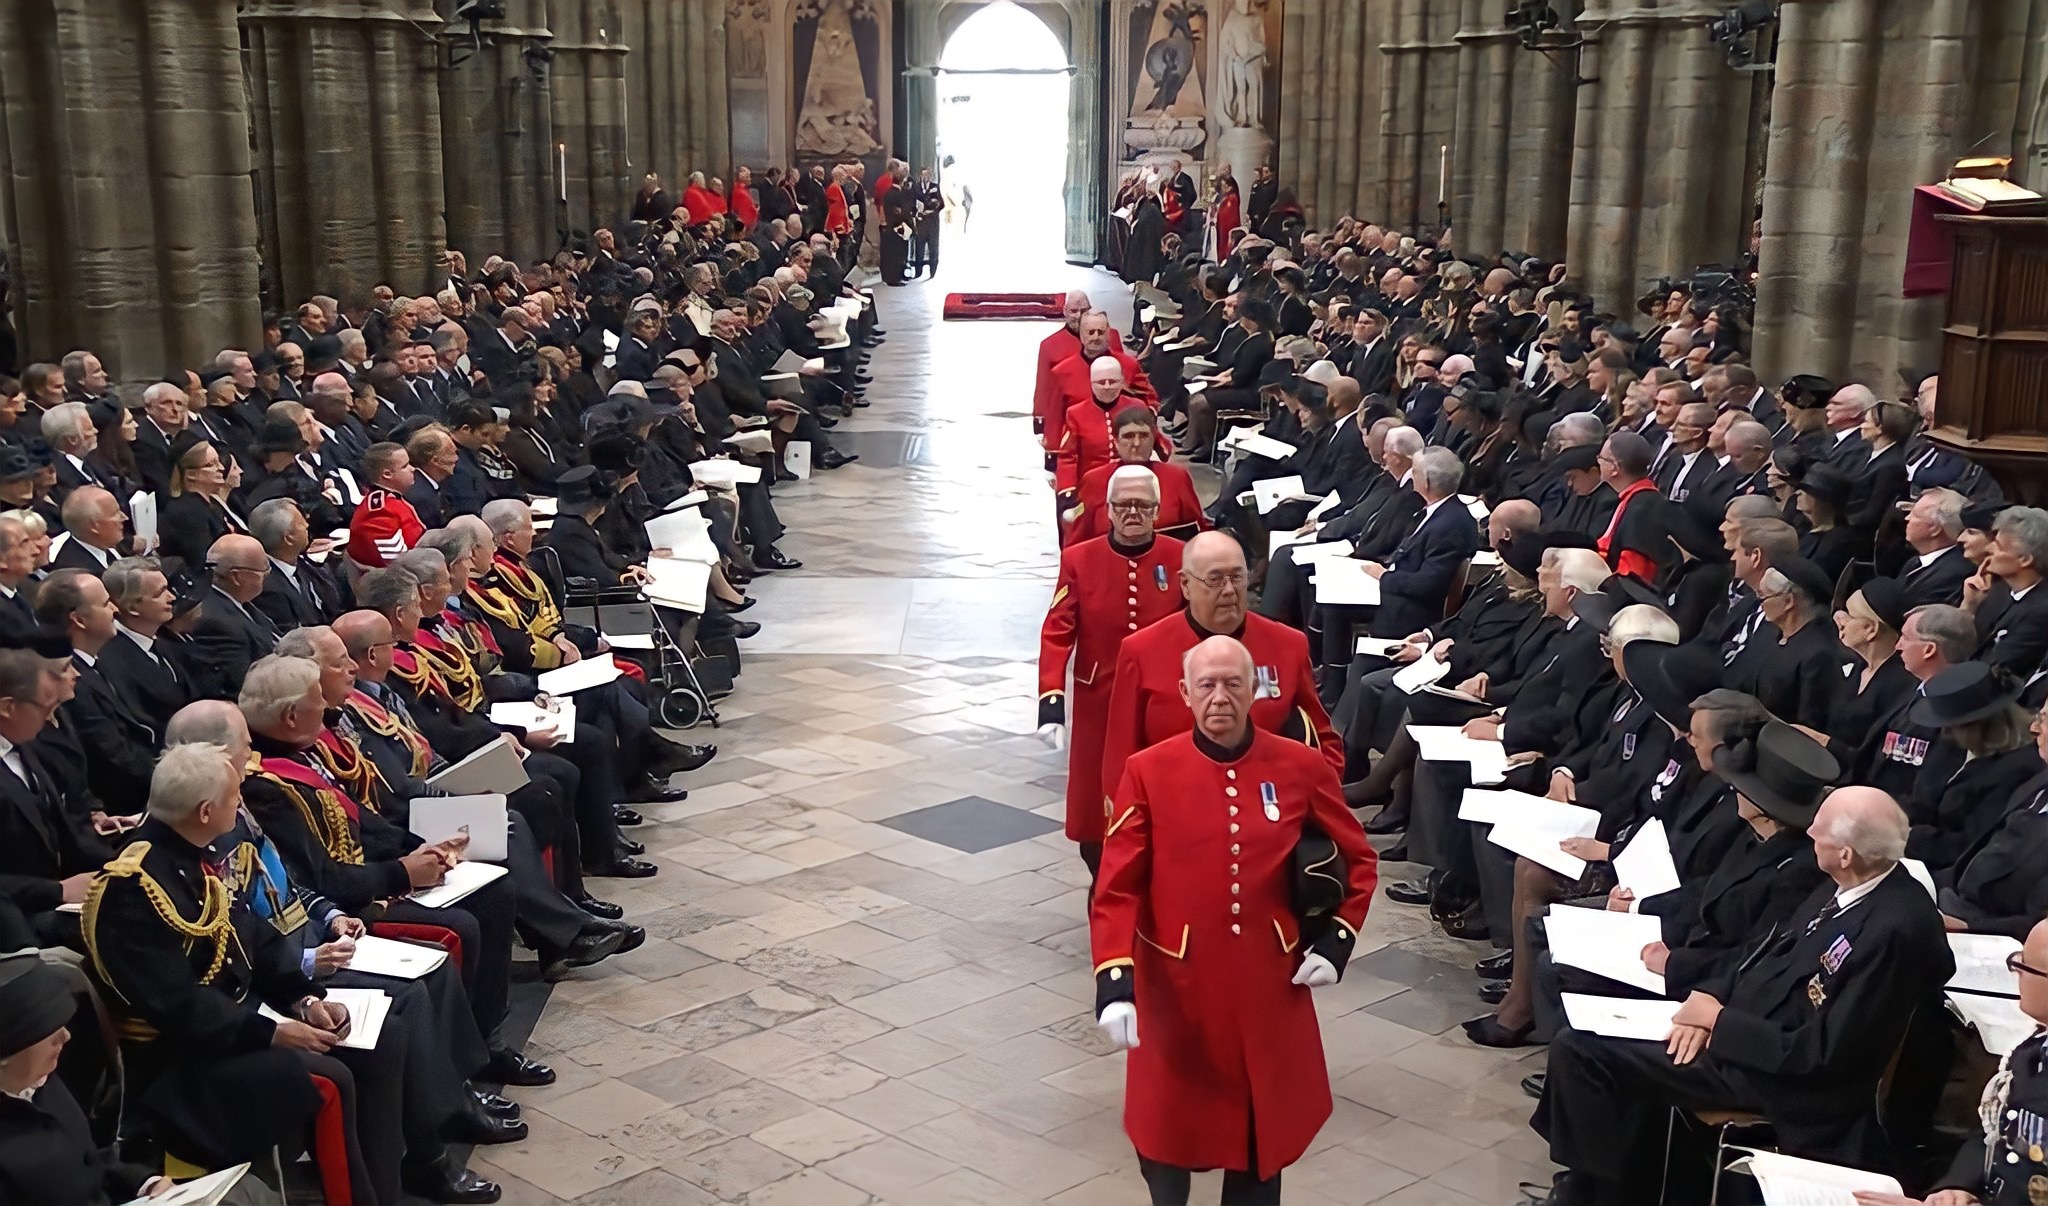 Chelsea Pensioners parade into Westminster Abbey for HM The Queen's Funeral